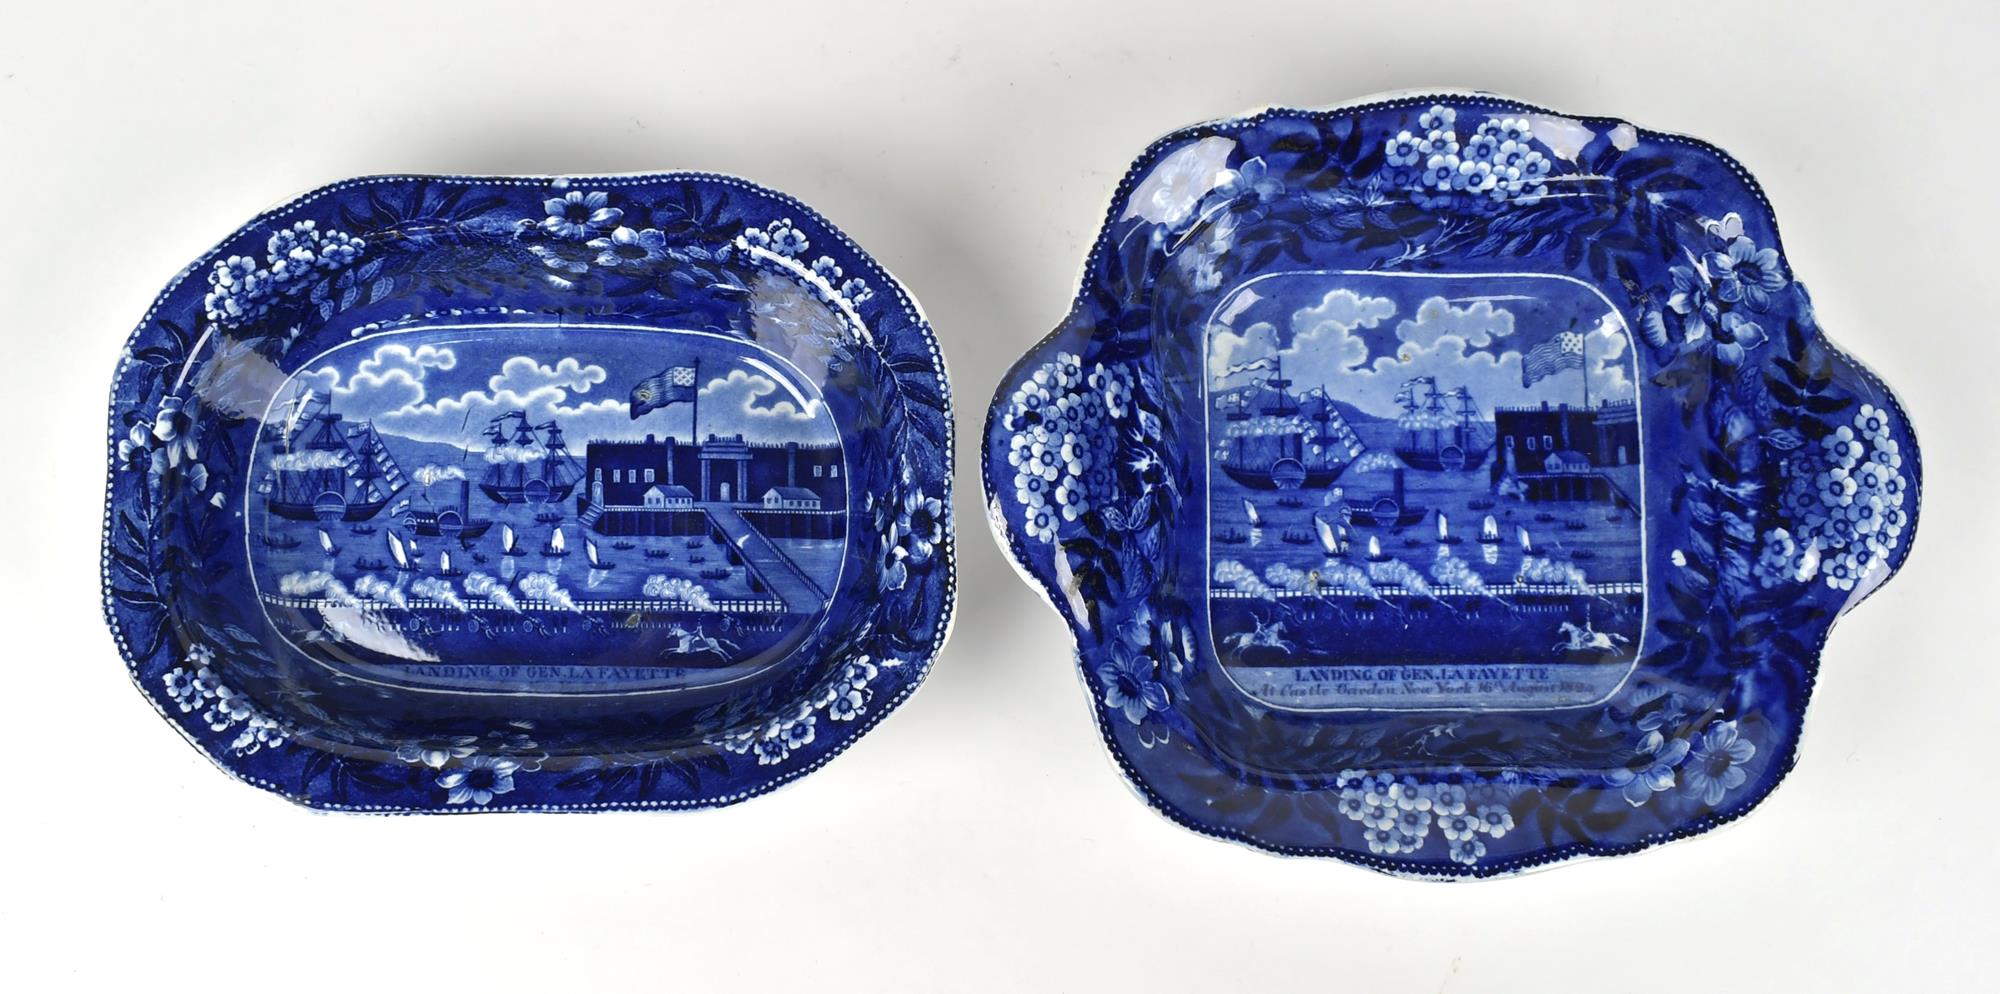 19TH C. HISTORICAL BLUE SERVING